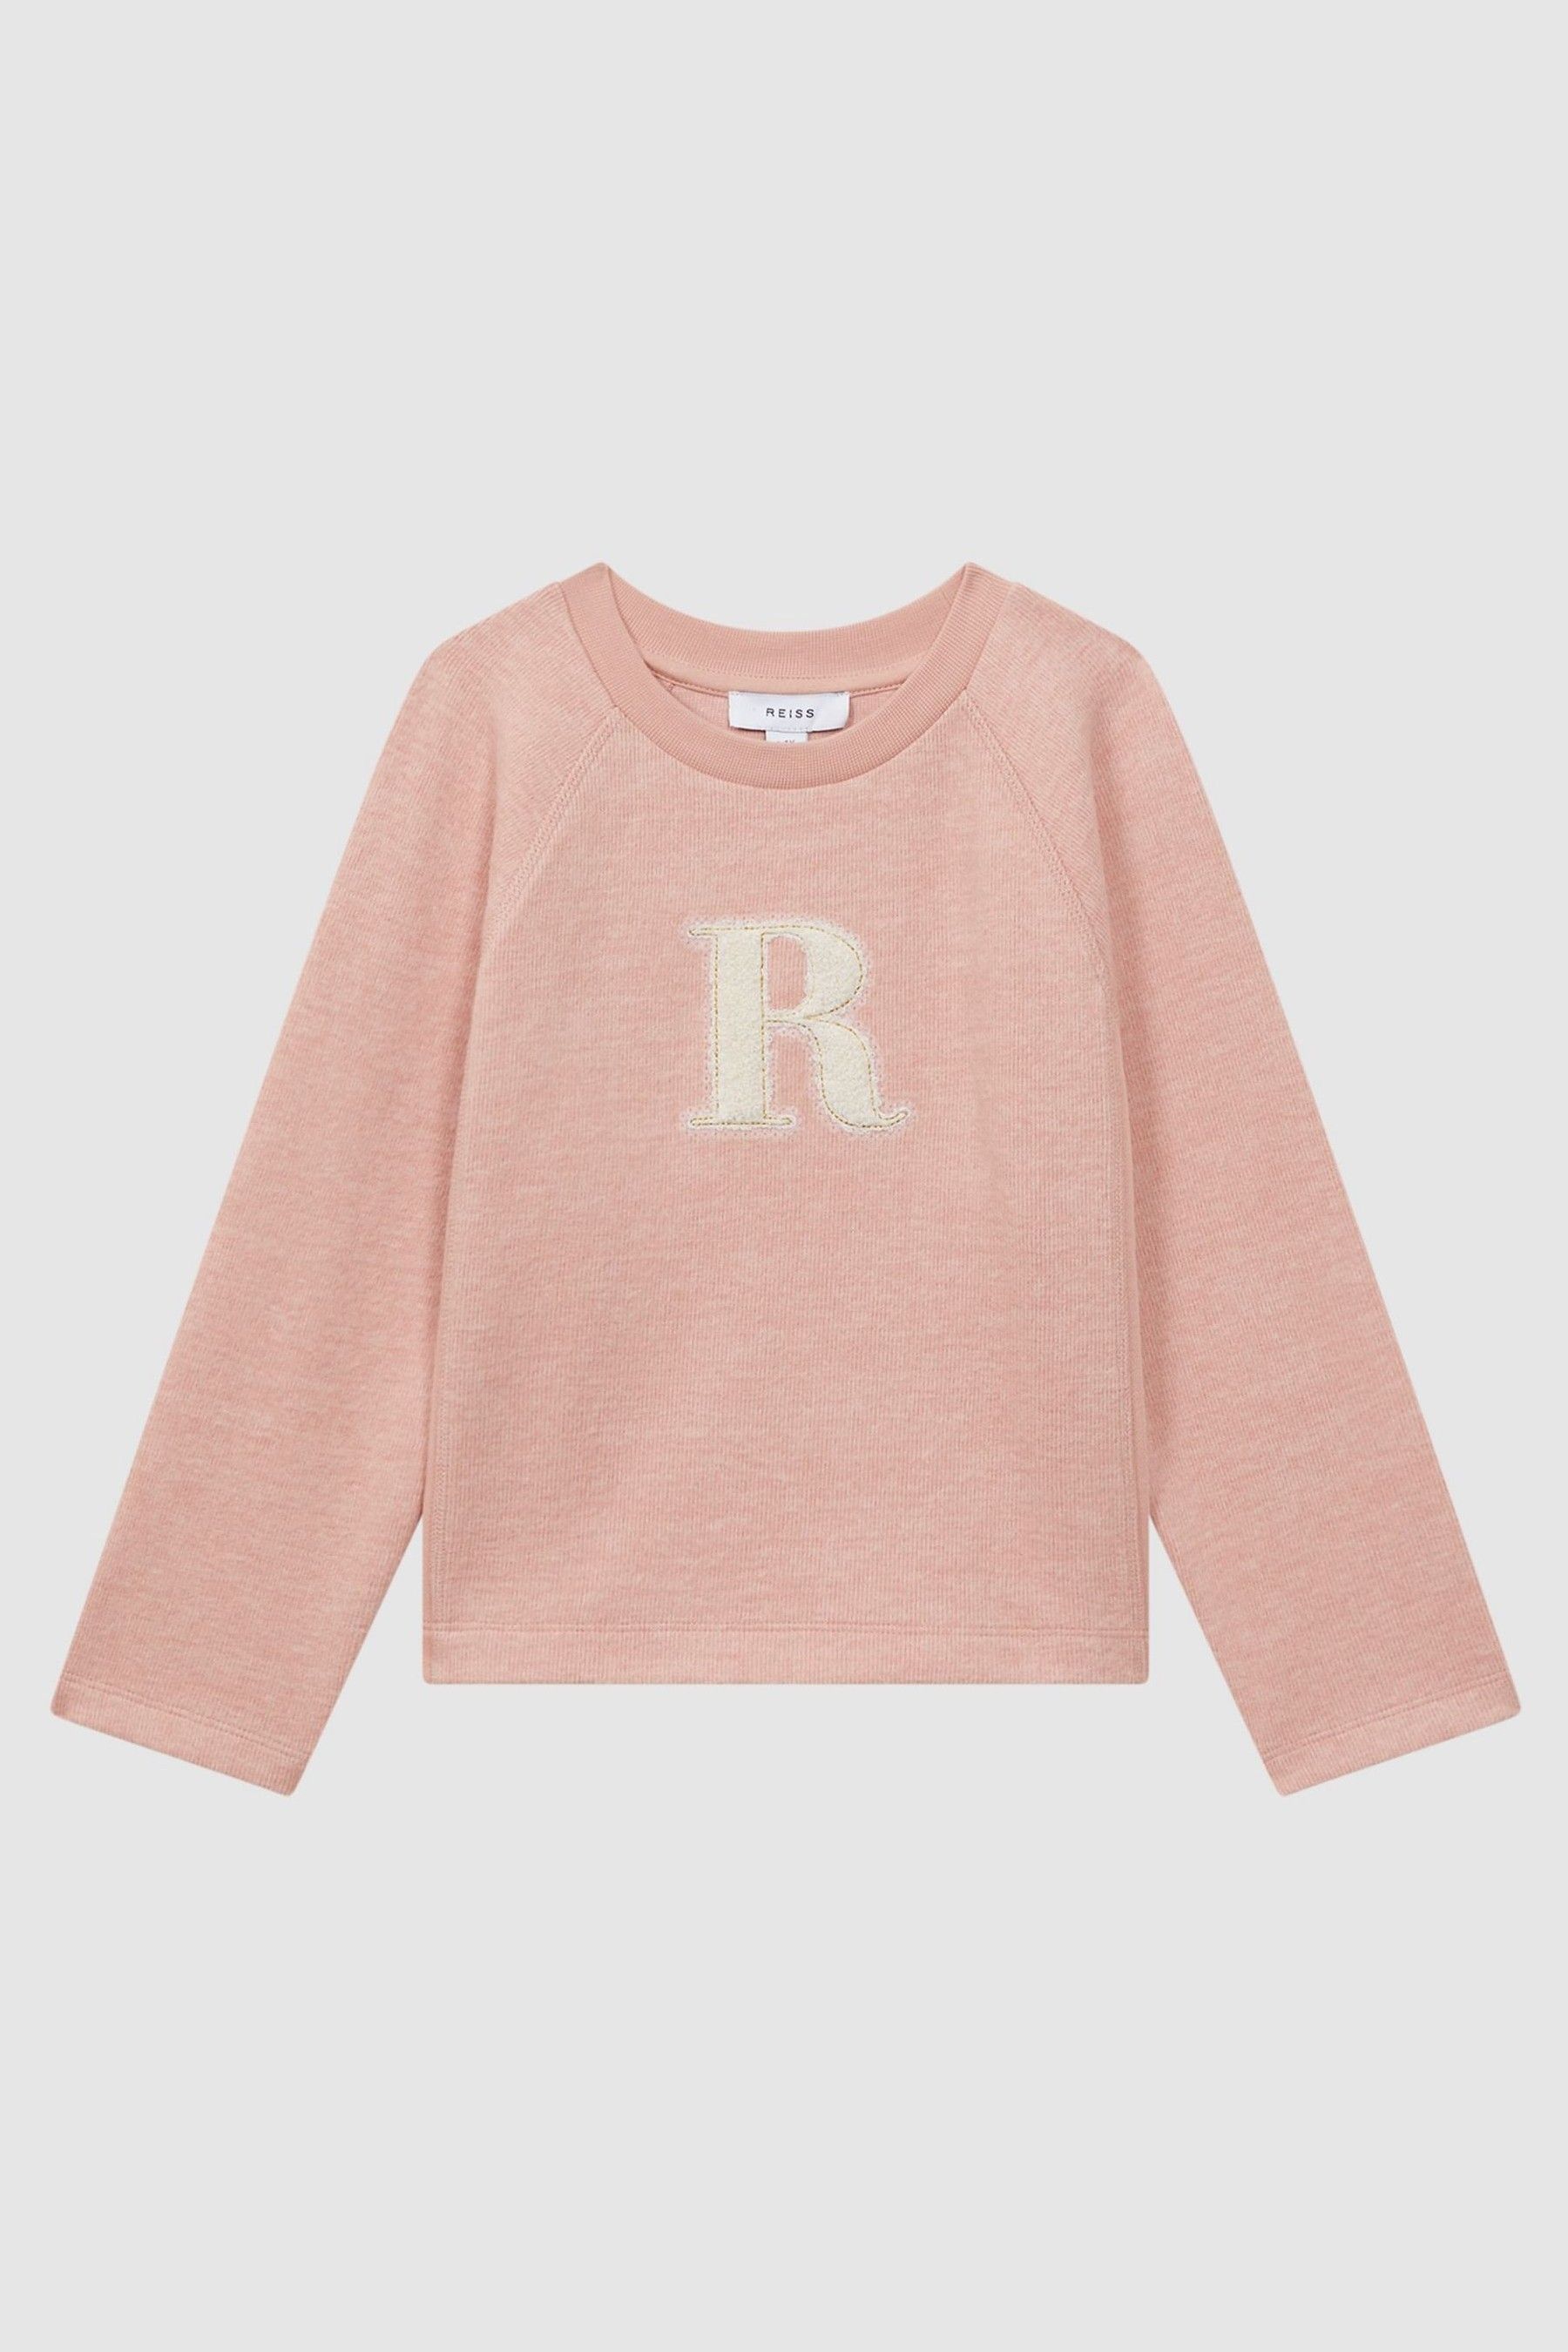 Reiss Kids' Connie - Apricot Junior Cotton Blend Crew Neck Top, Age 4-5 Years